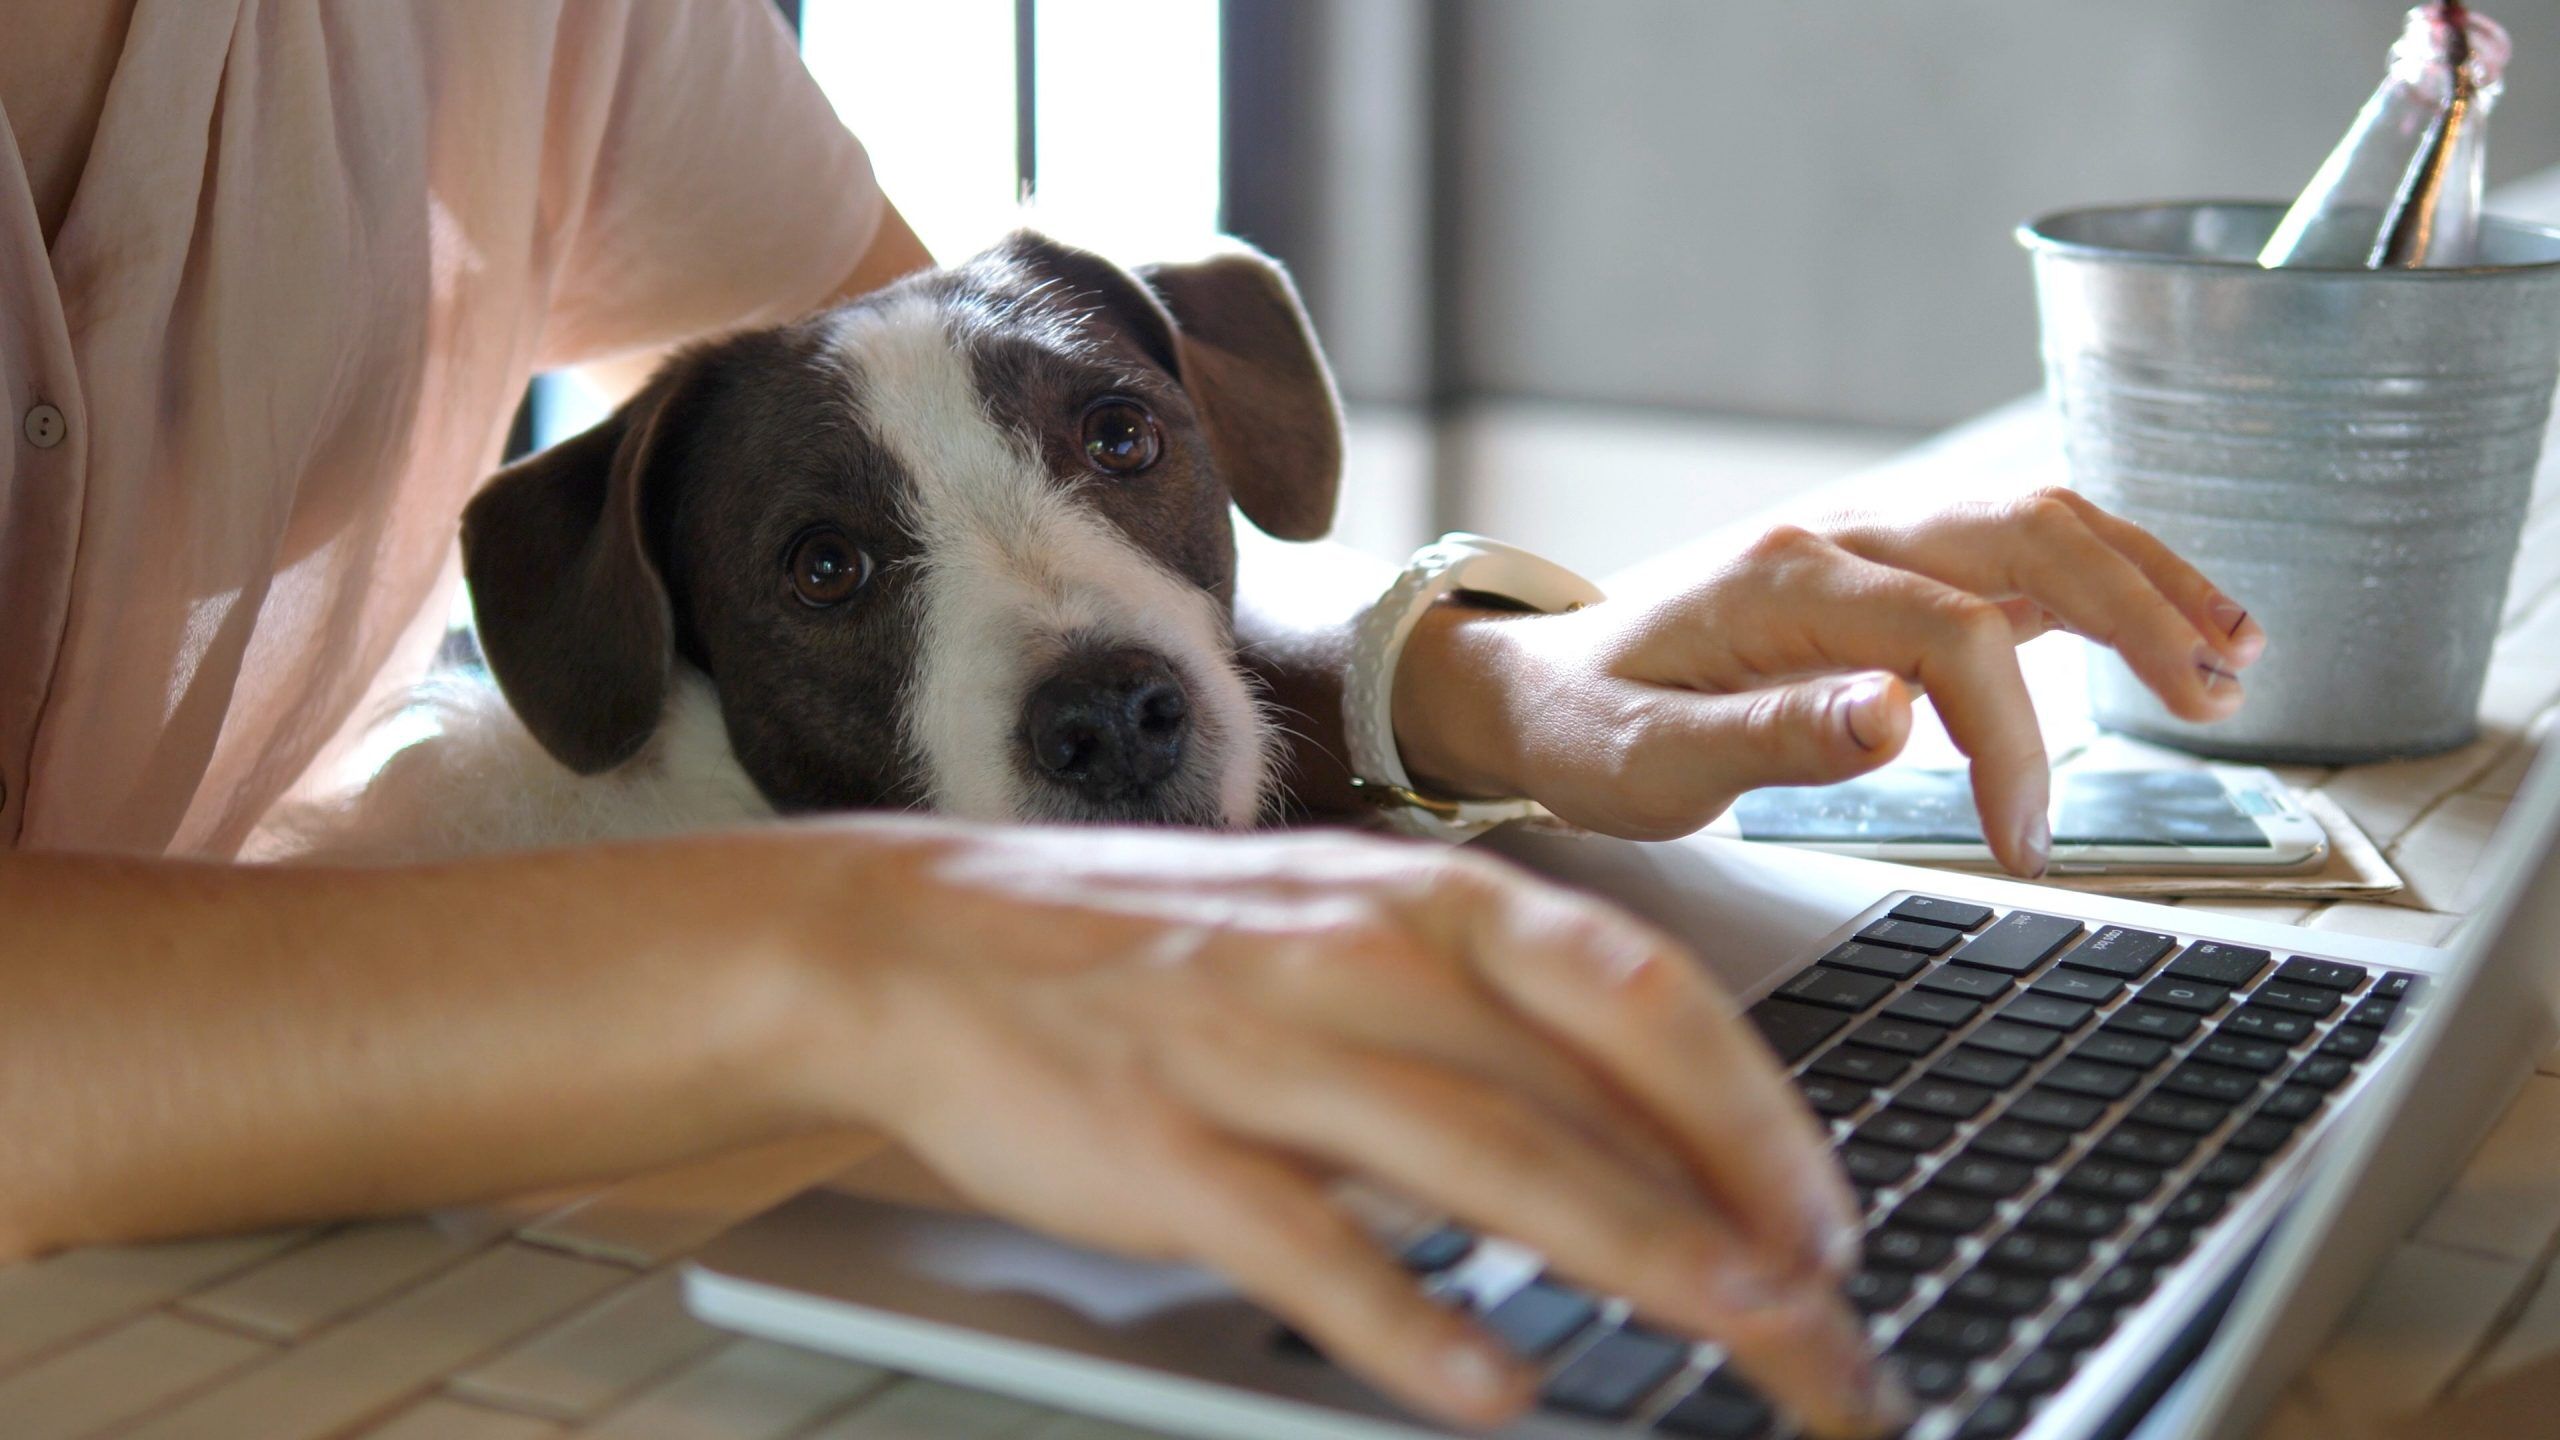 airvet helps pet parents work in a pet-friendly office environment